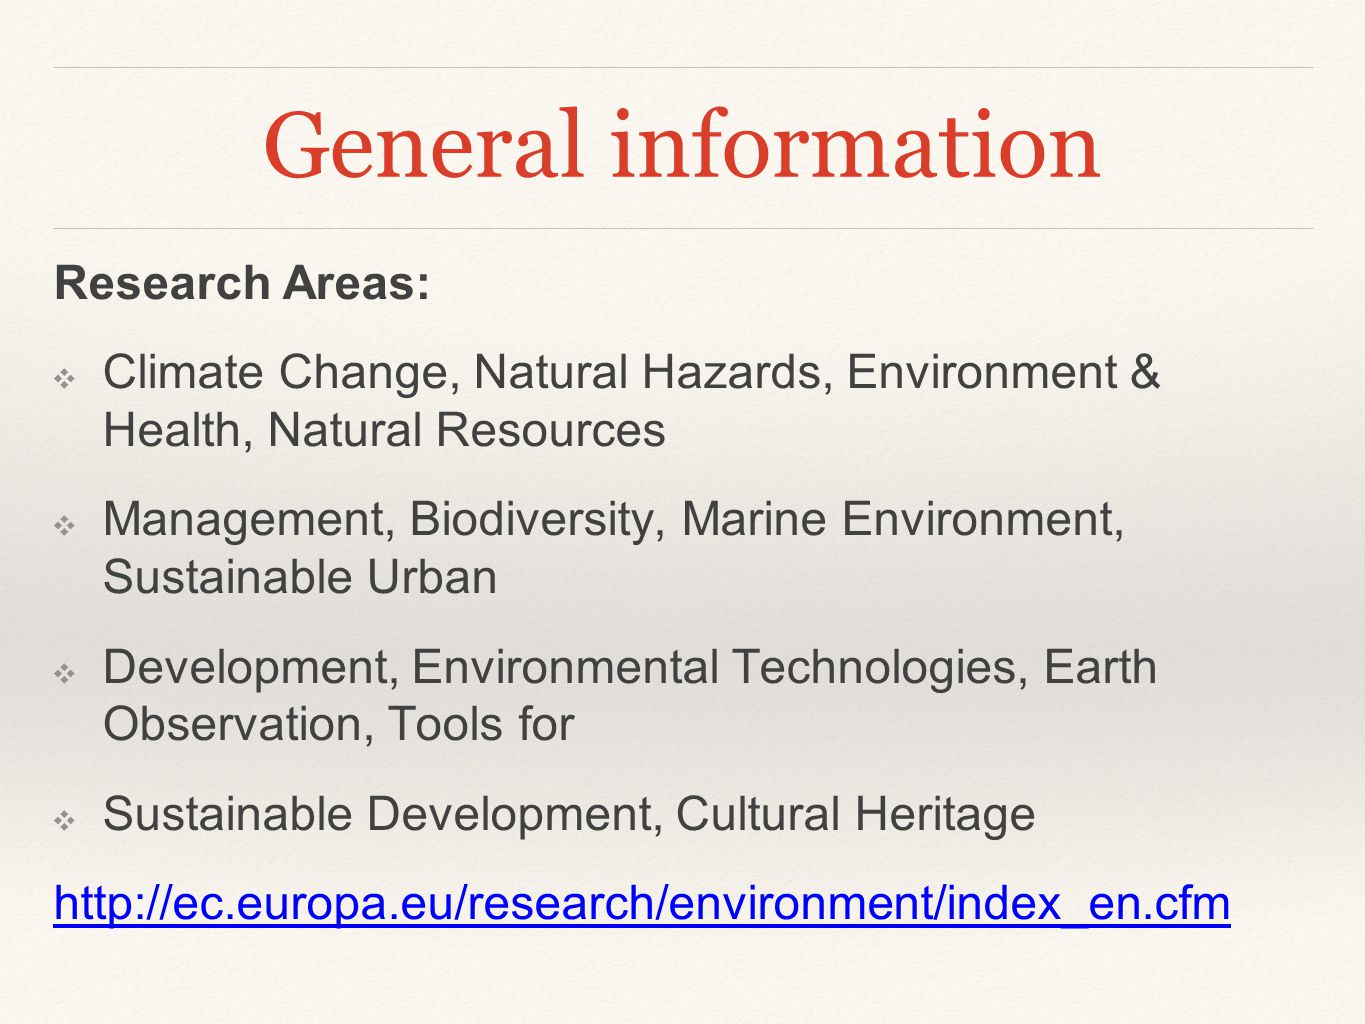 General information Research Areas: ❖ Climate Change, Natural Hazards, Environment & Health, Natural Resources ❖ Management, Biodiversity, Marine Environment, Sustainable Urban ❖ Development, Environmental Technologies, Earth Observation, Tools for ❖ Sustainable Development, Cultural Heritage